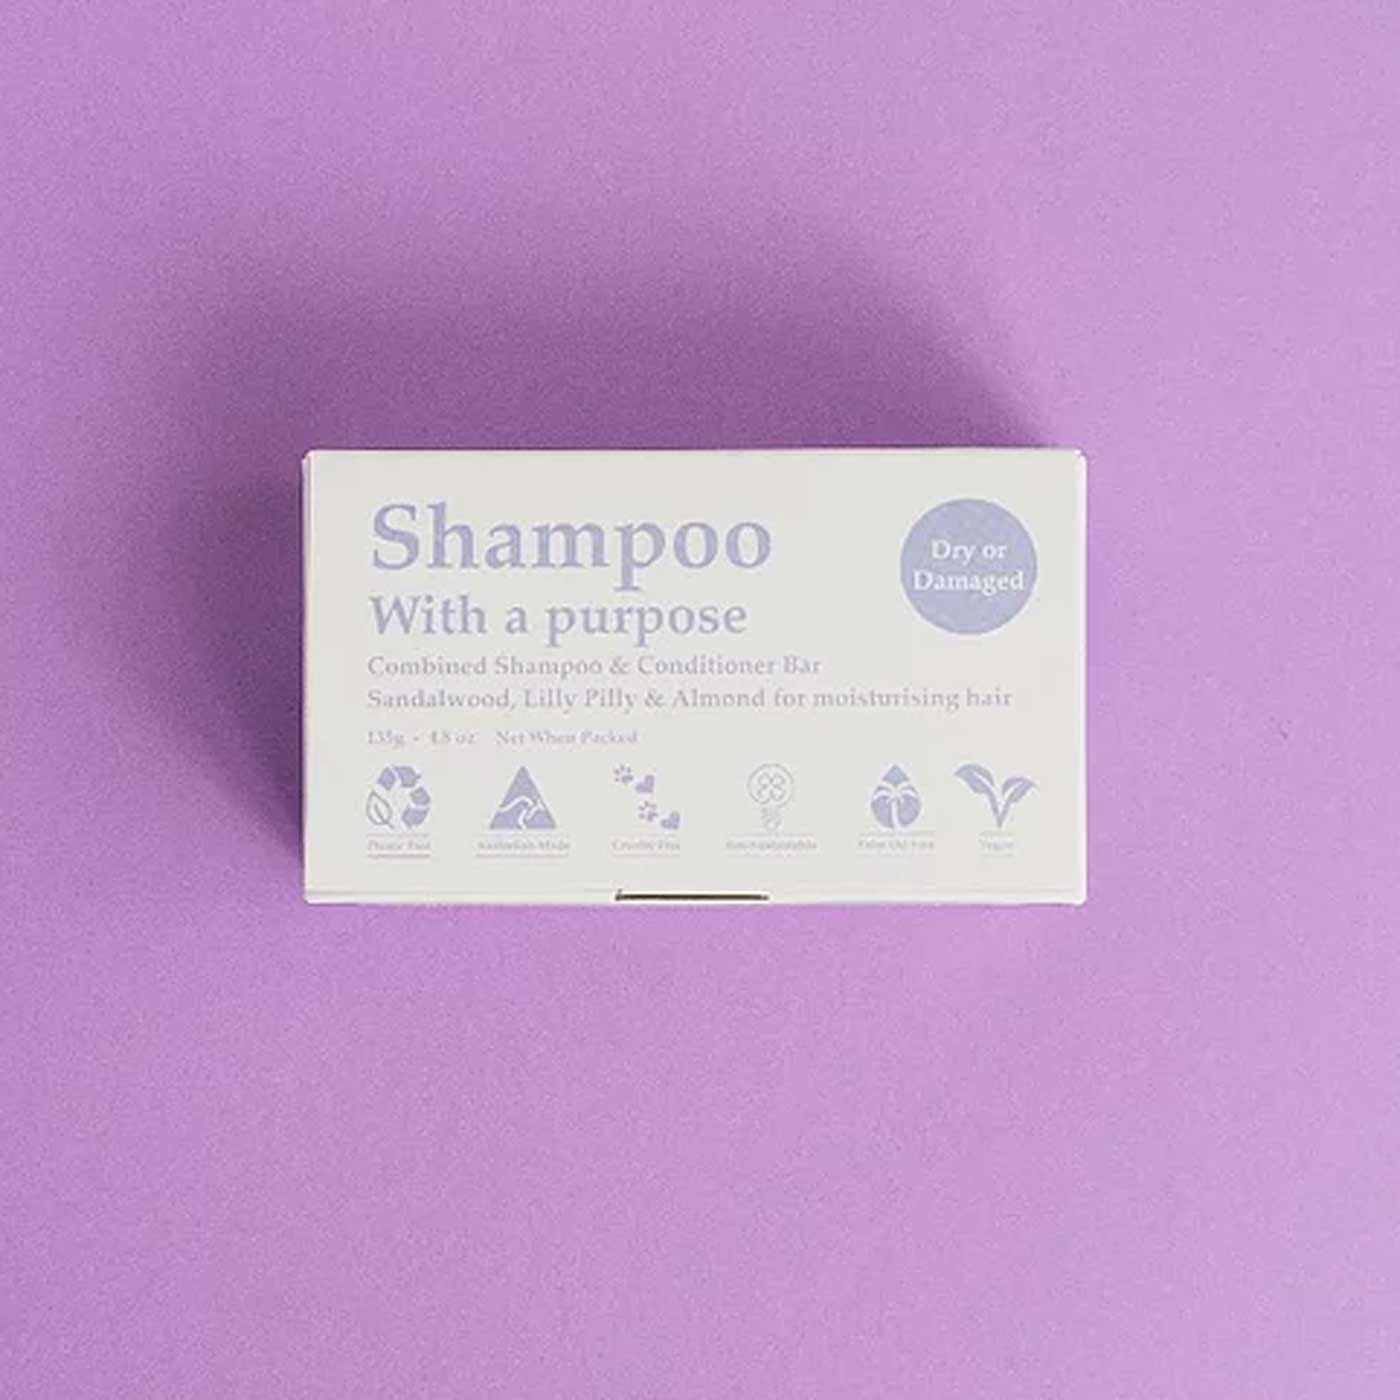 Shampoo with a purpose shampoo and conditioner bar for dry or damaged hair. Diminish.